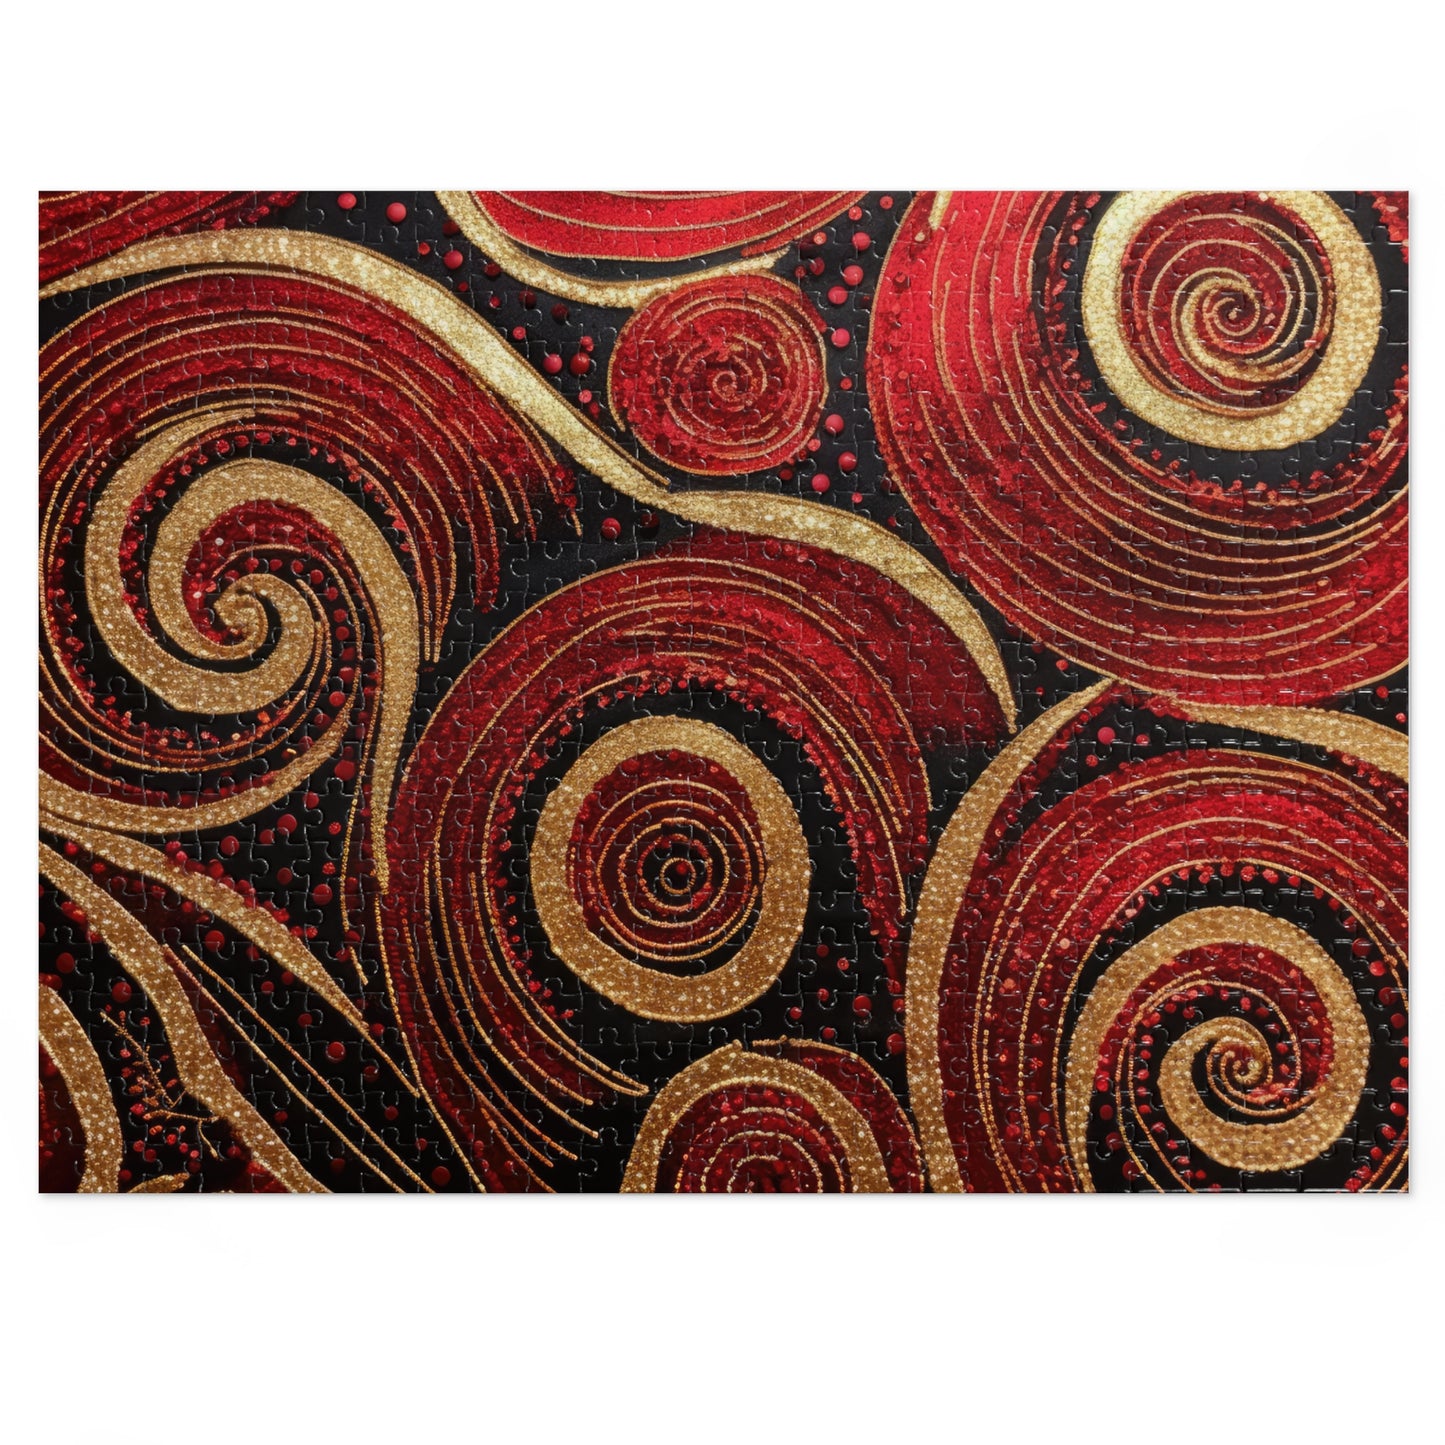 Crescents and Curls on Red #3 Jigsaw Puzzle (500 or 1000 Piece) Puzzle AllStyleArt 500 Piece  